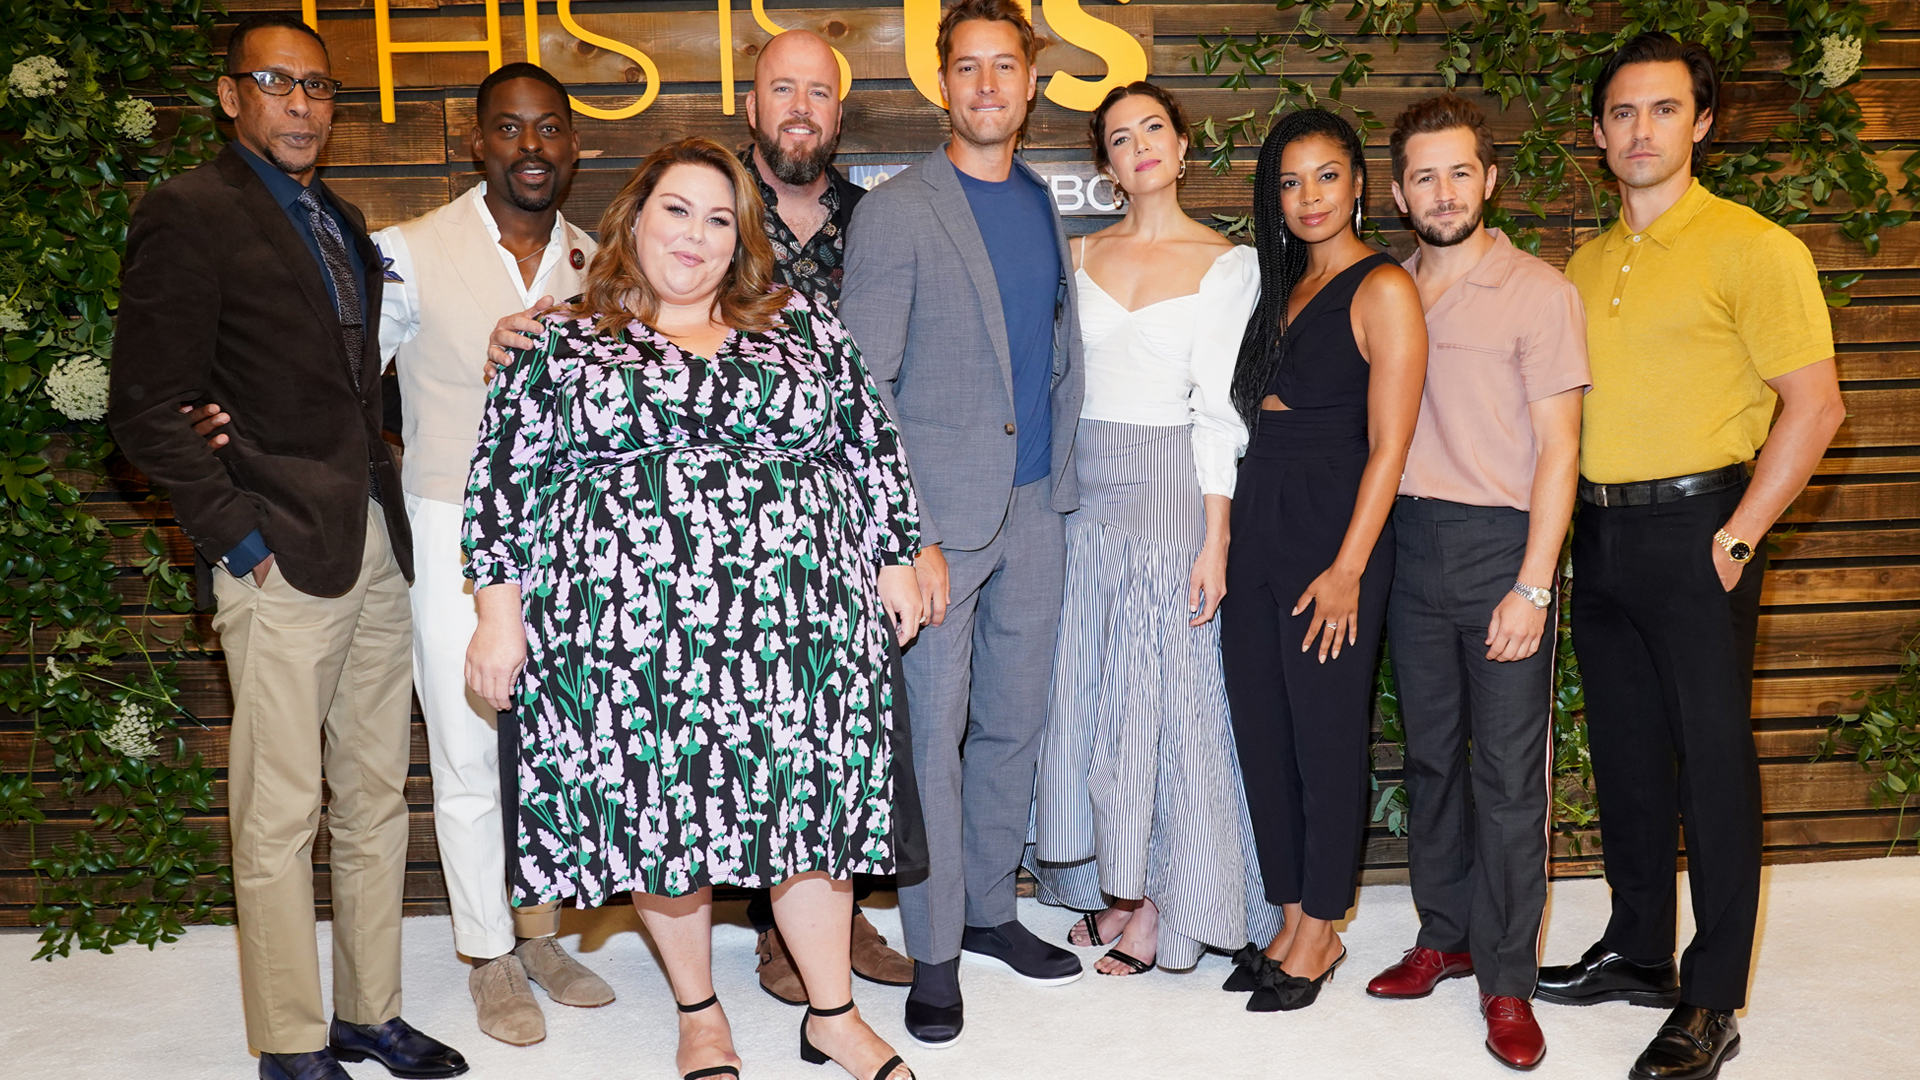 ‘This Is Us’ cast members Ron Cephas Jones, Sterling K. Brown, Chrissy Metz, Chris Sullivan, Justin Hartley, Mandy Moore, Susan Kelechi Watson, Michael Angarano, and Milo Ventimiglia at NBC’s Pancakes with the Pearsons event in 2019